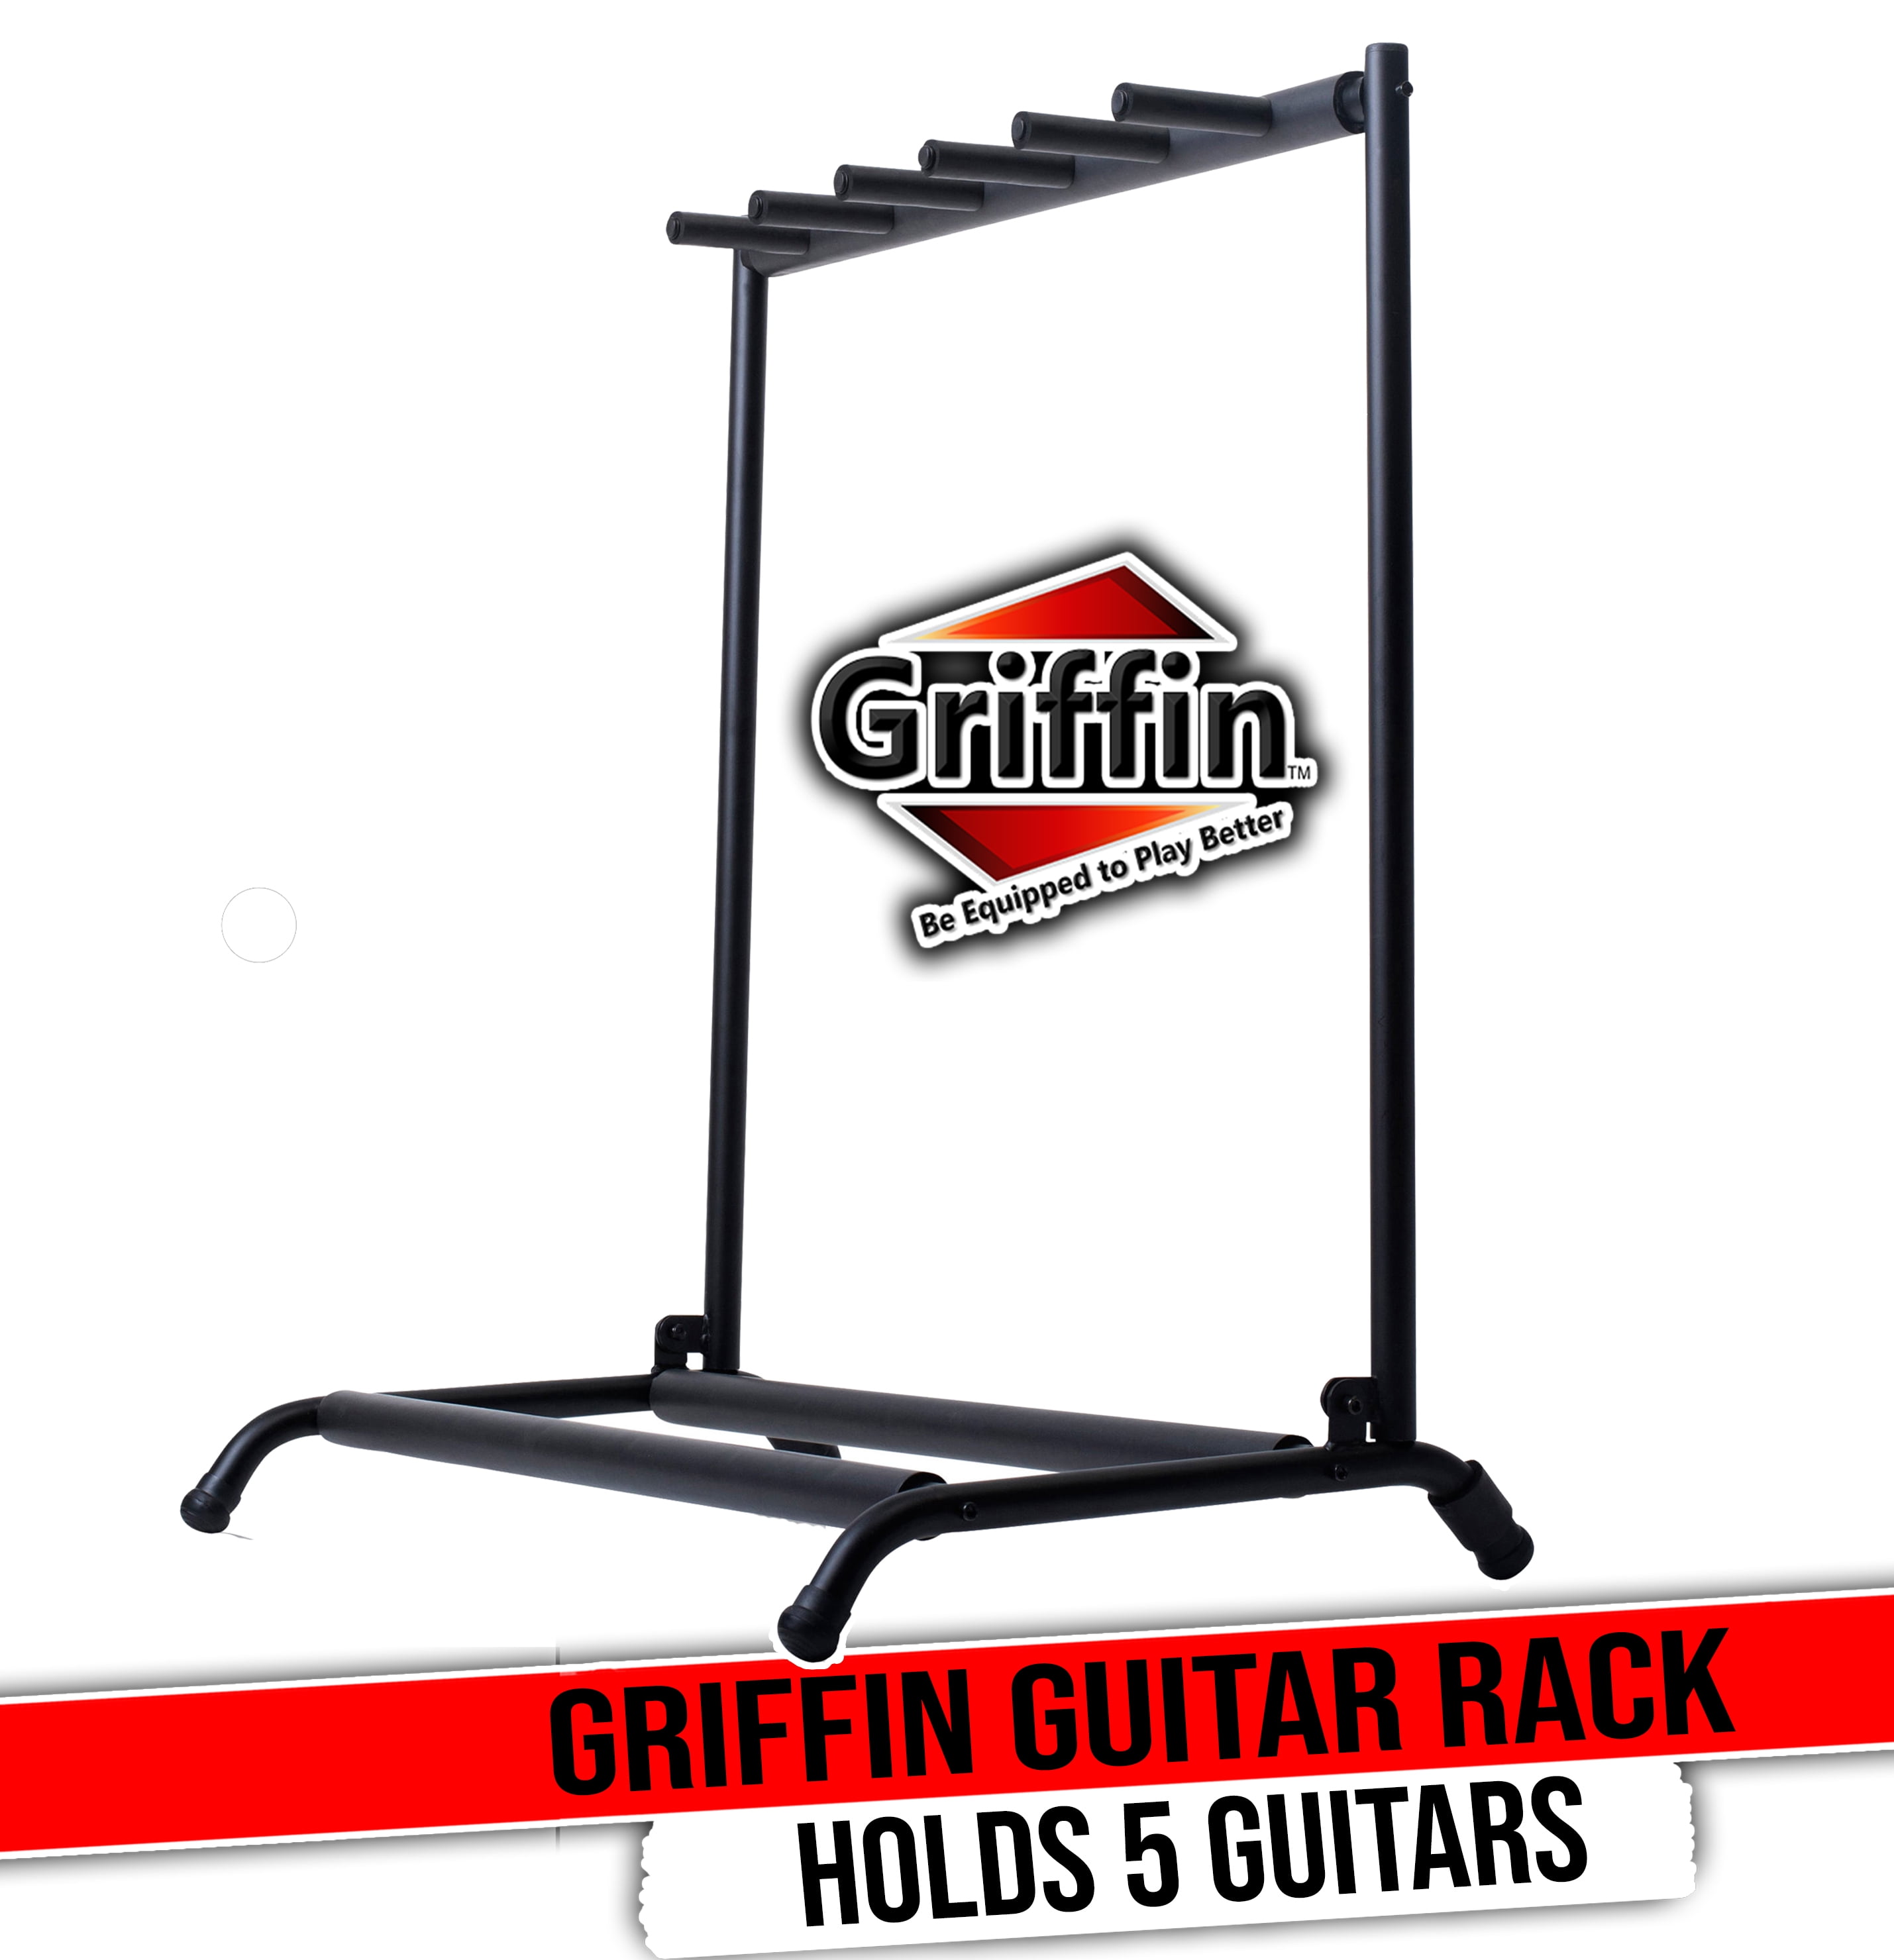 GRIFFIN 5 Guitar Stand Rack - Holder for Five Guitars & Folds Up For Easy  Transport - Neoprene Tubing Accessories For Music Bands, Recording Studios,  